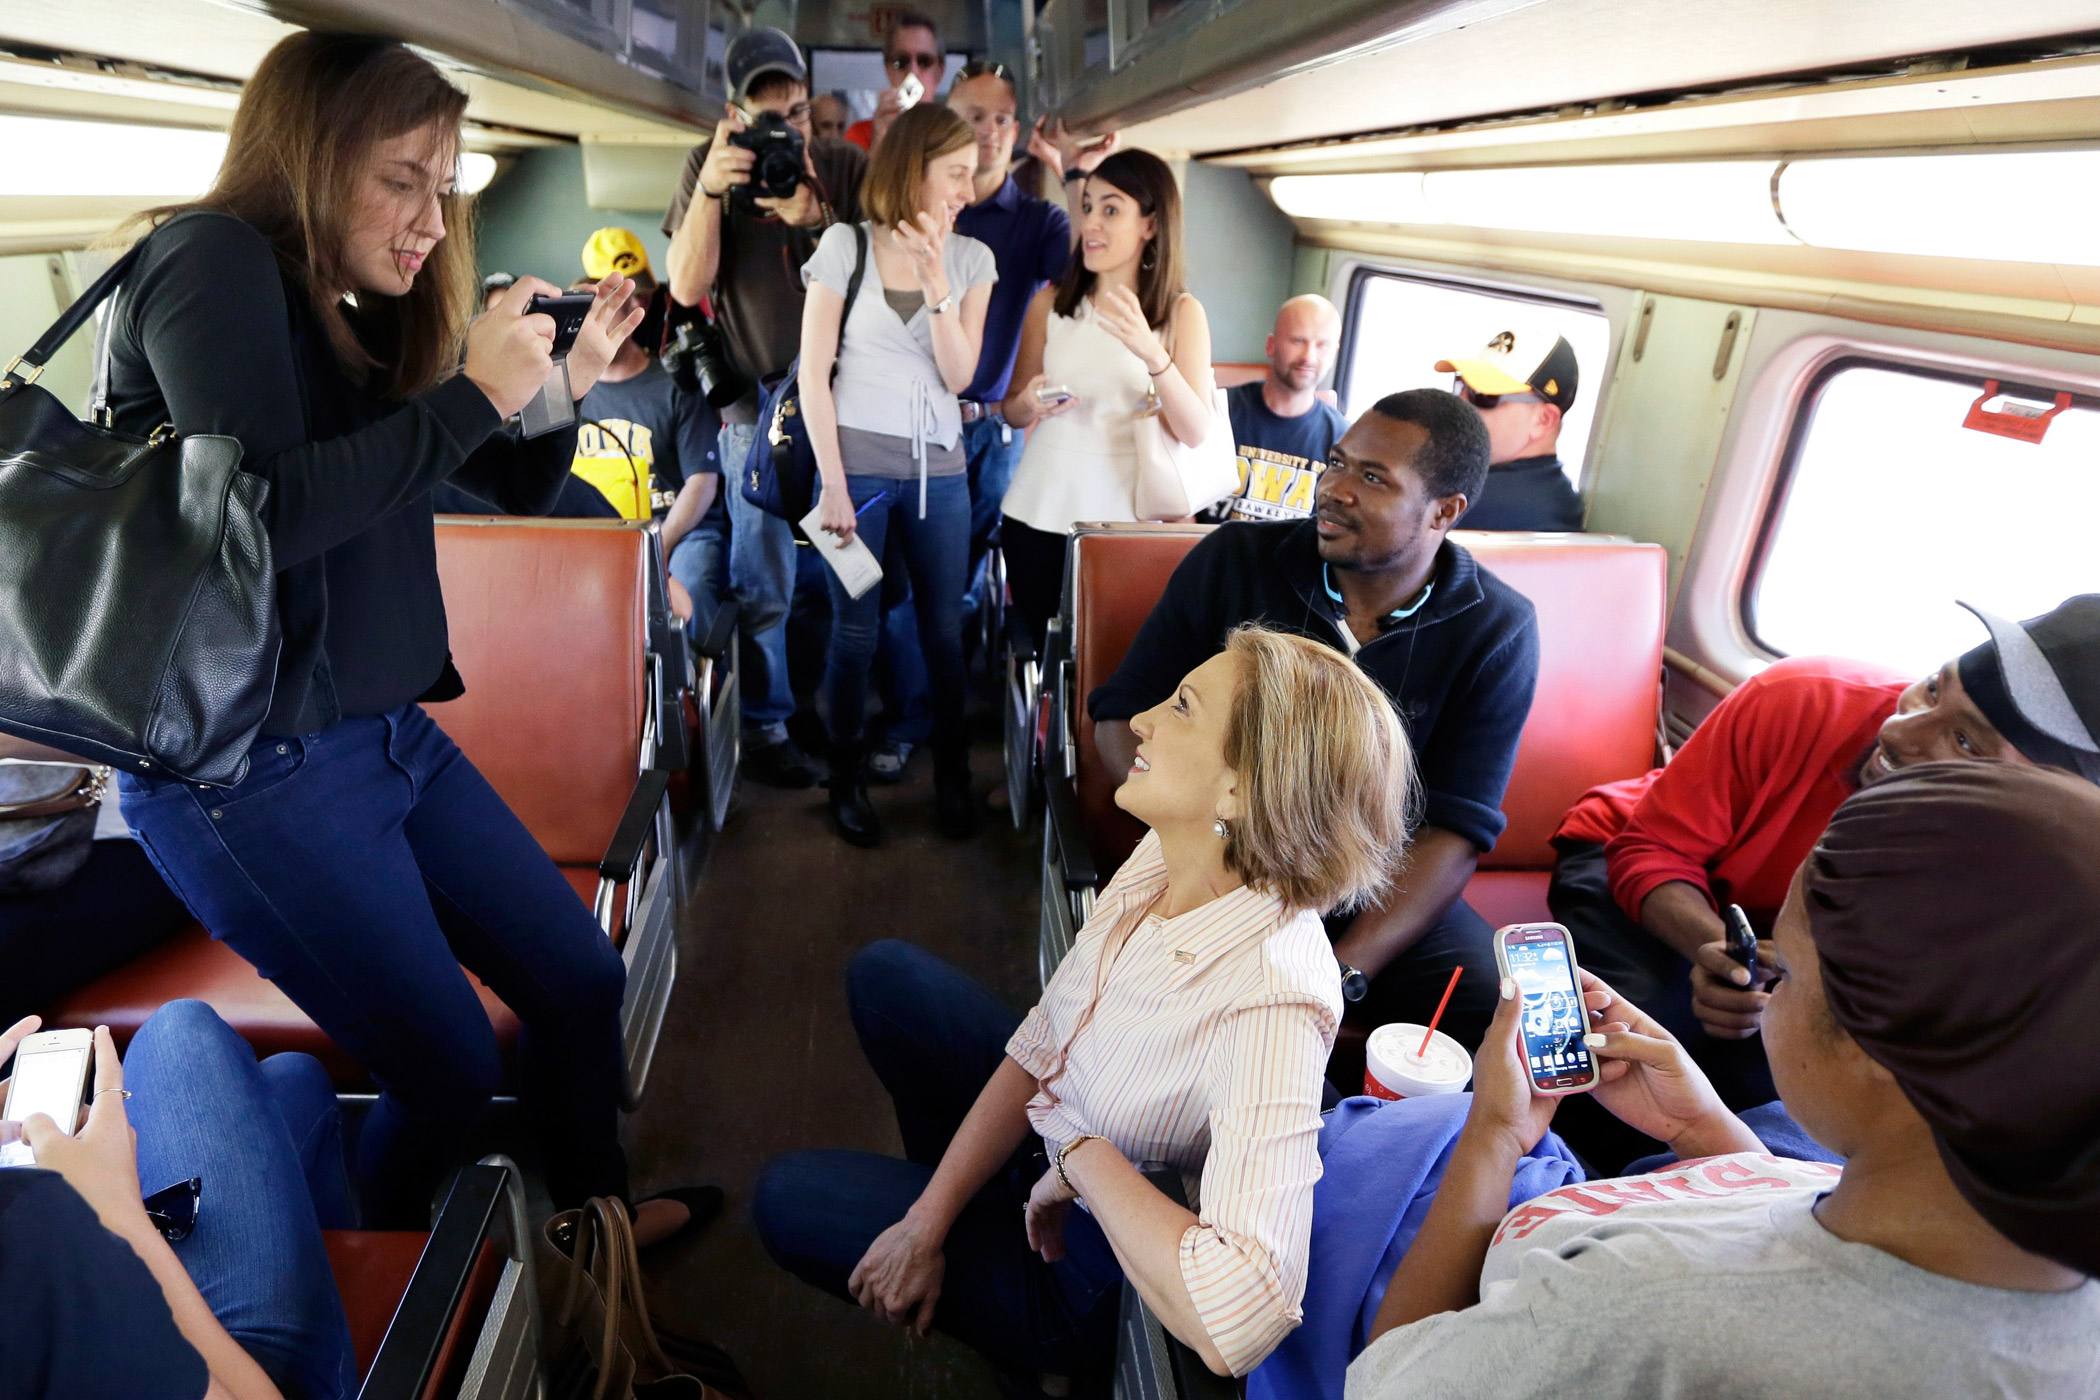 Republican presidential candidate Carly Fiorina, center, rides a train to an event in Iowa City, Iowa on Sept. 26, 2015.